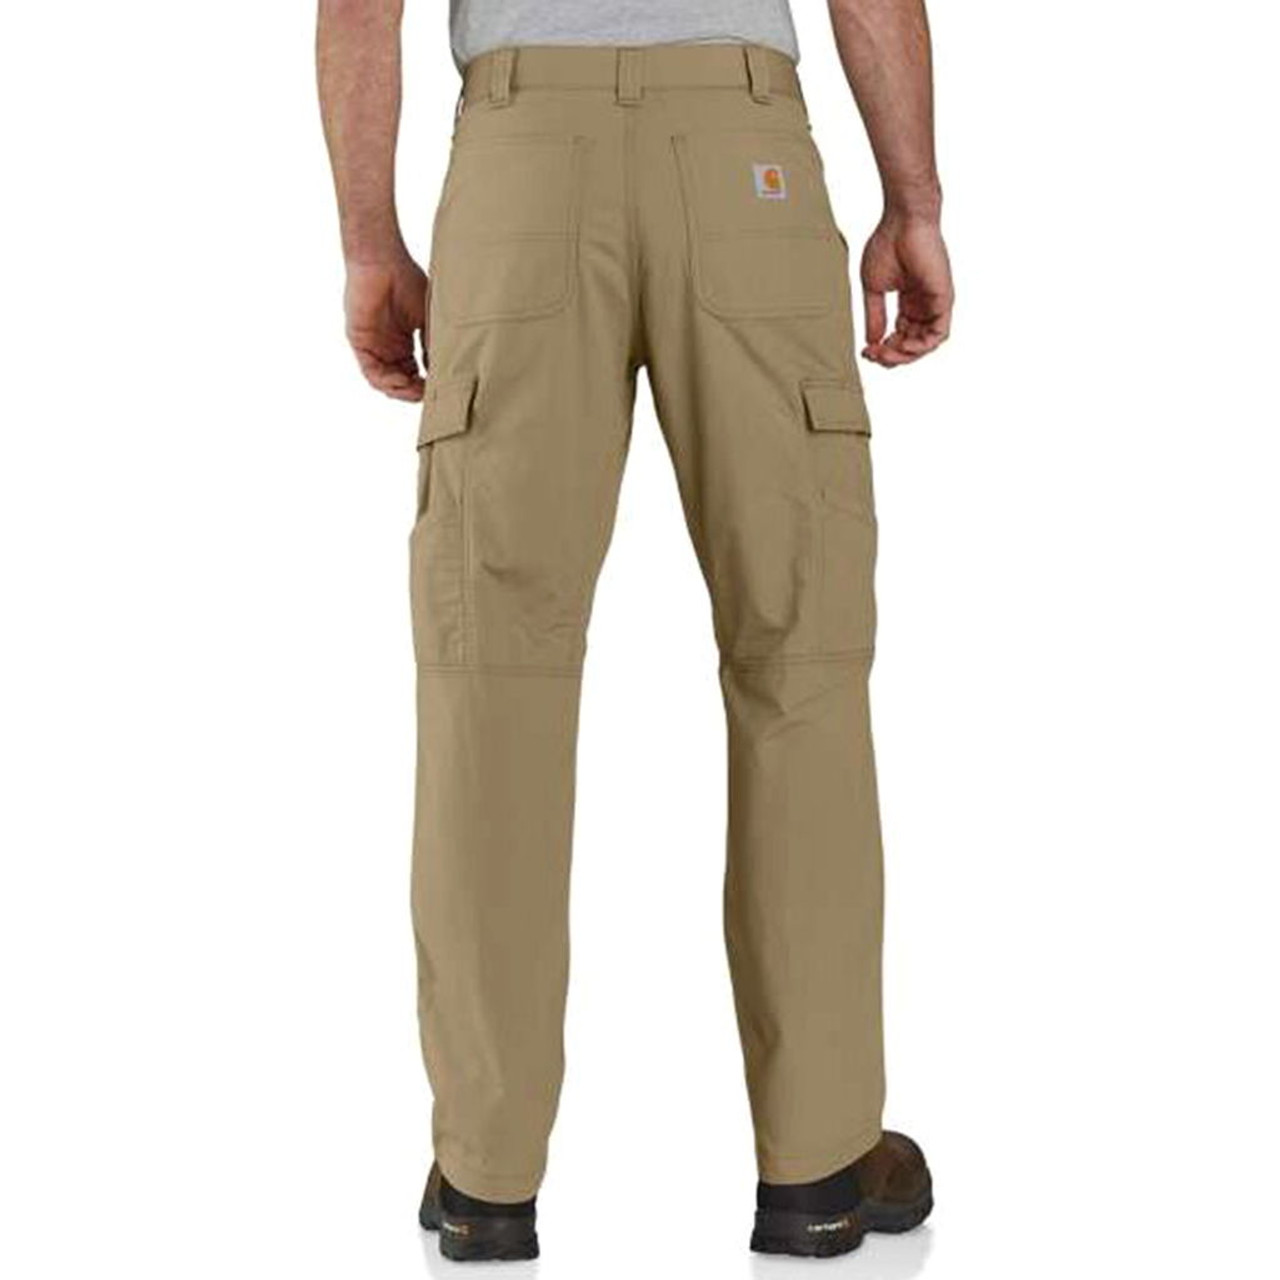  Carhartt Men's Force Relaxed Fit Ripstop Cargo Work